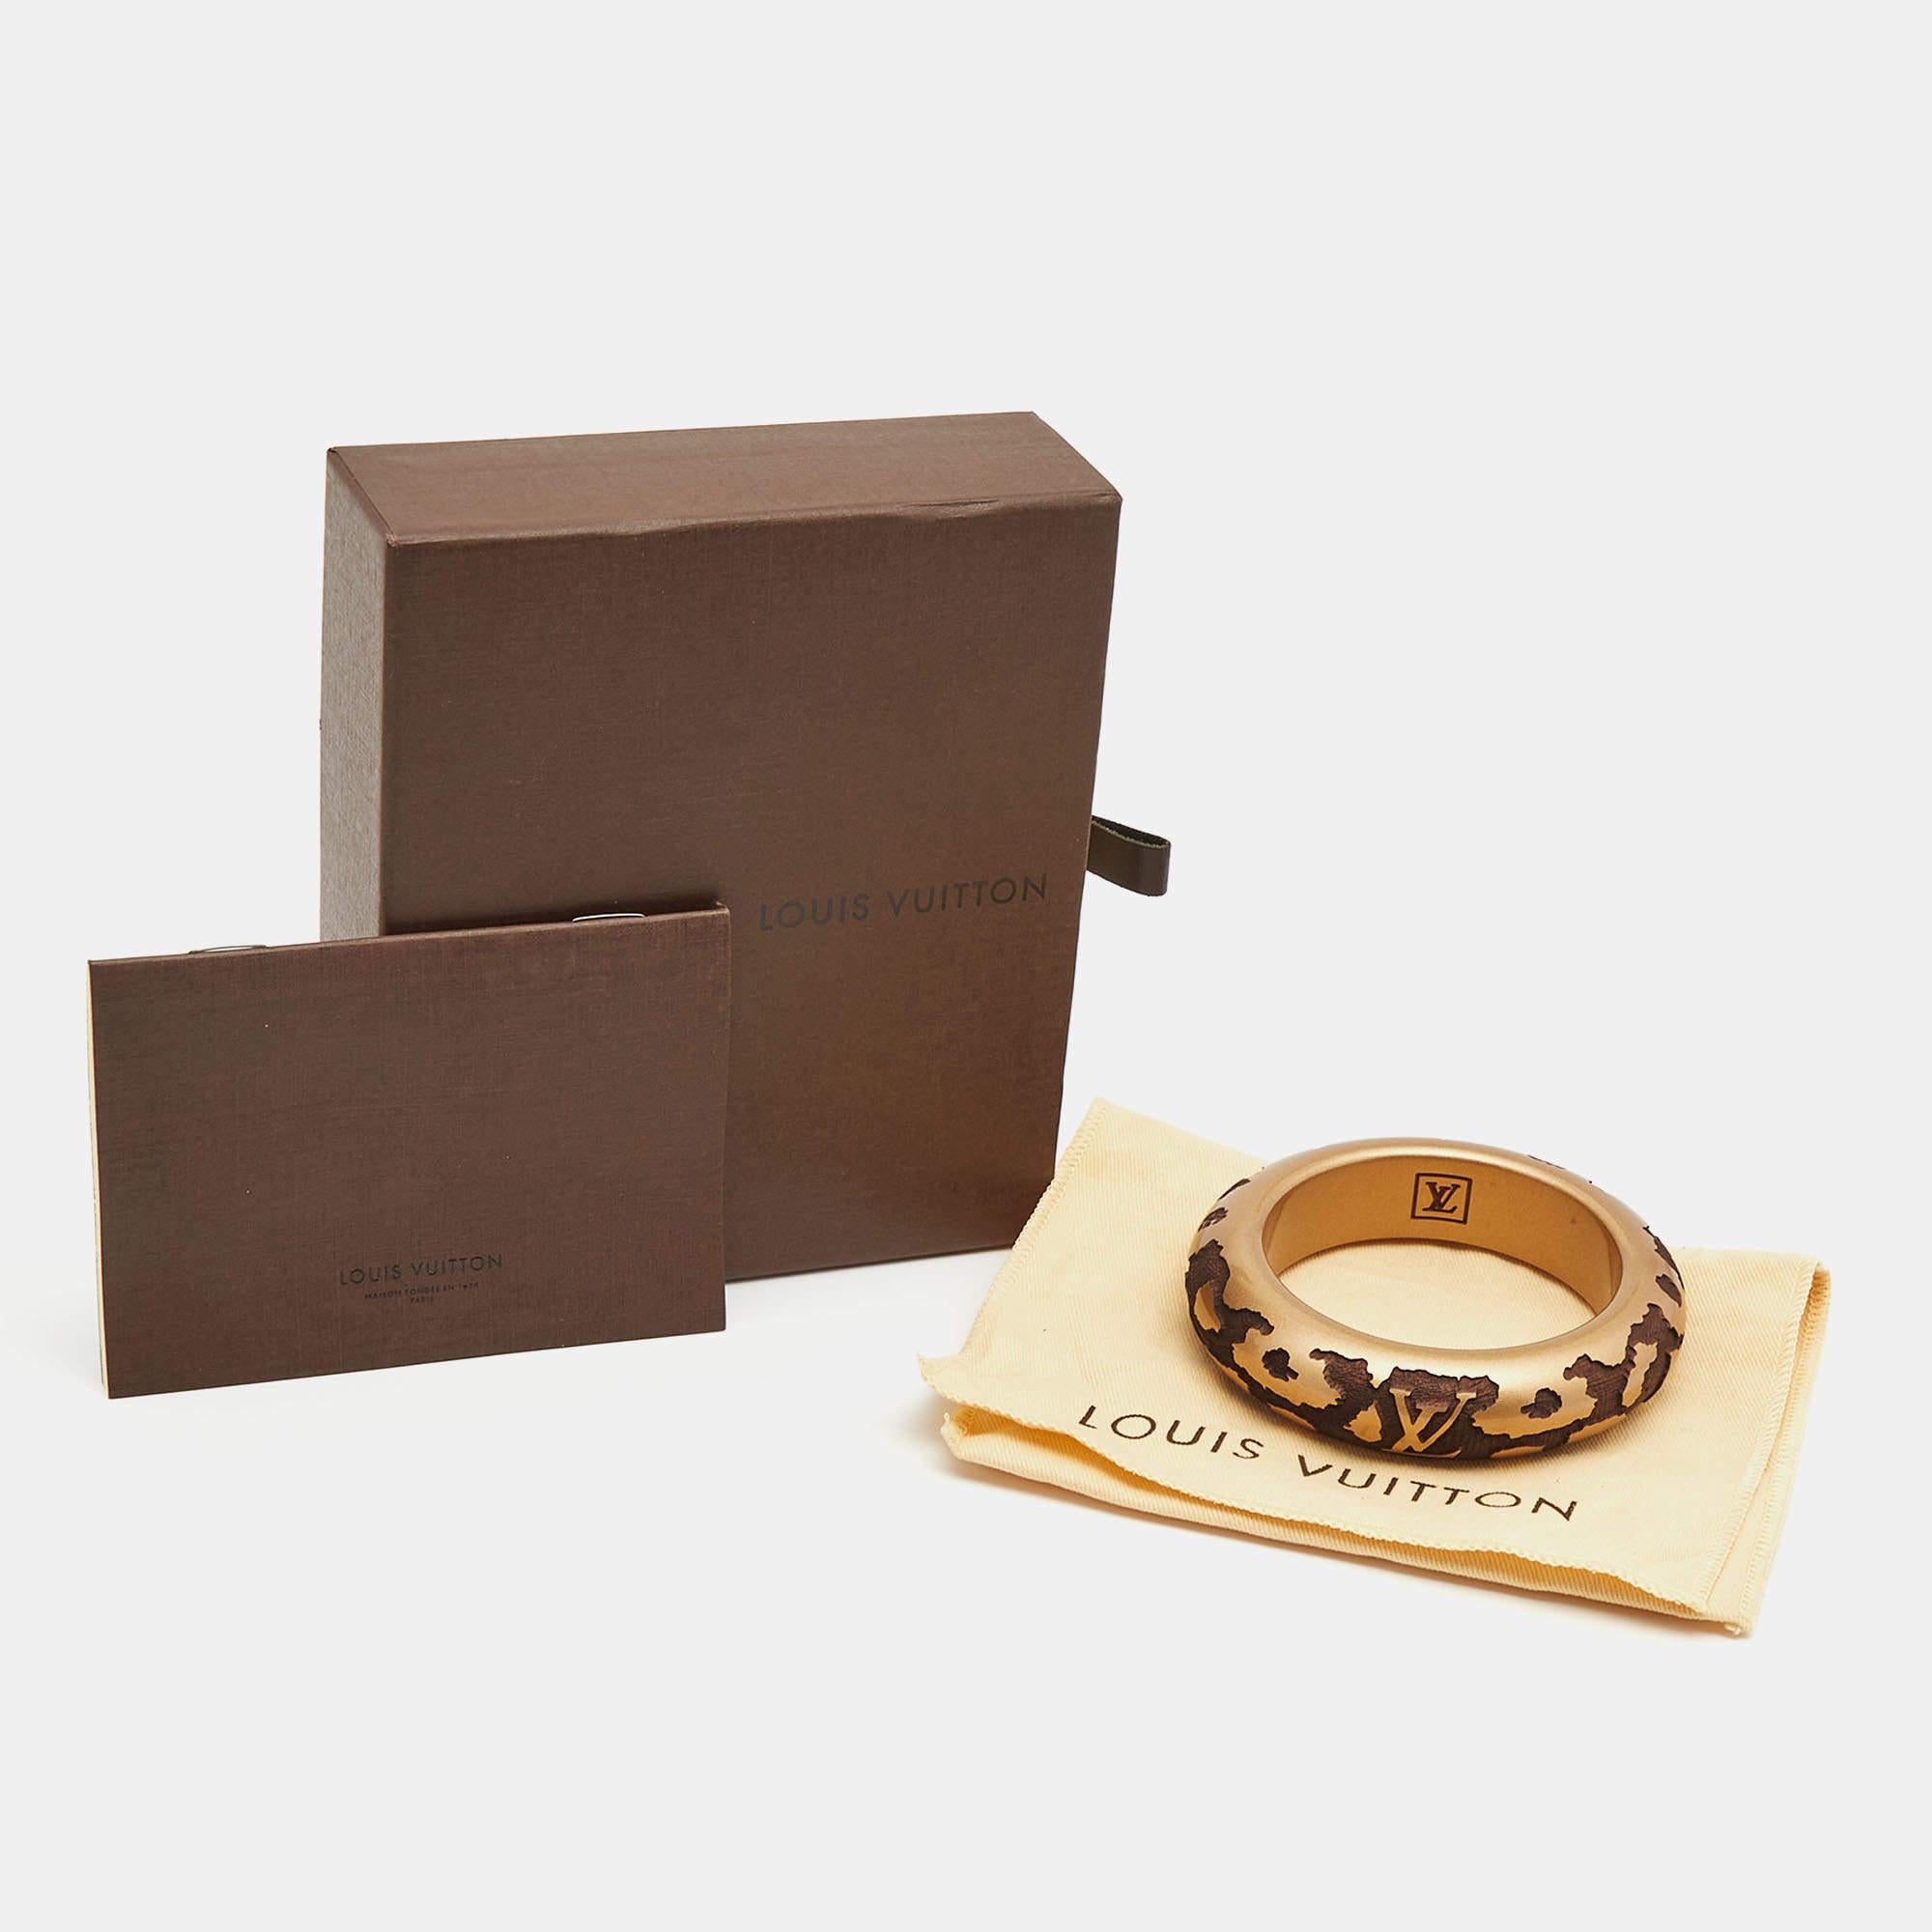 Louis Vuitton brings this fabulous bracelet rendered in an elegant silhouette for the woman who is ready to ace every accessory game. It is sure to catch an eye and make your heart skip a beat. Flaunt it with your all looks, from formal to